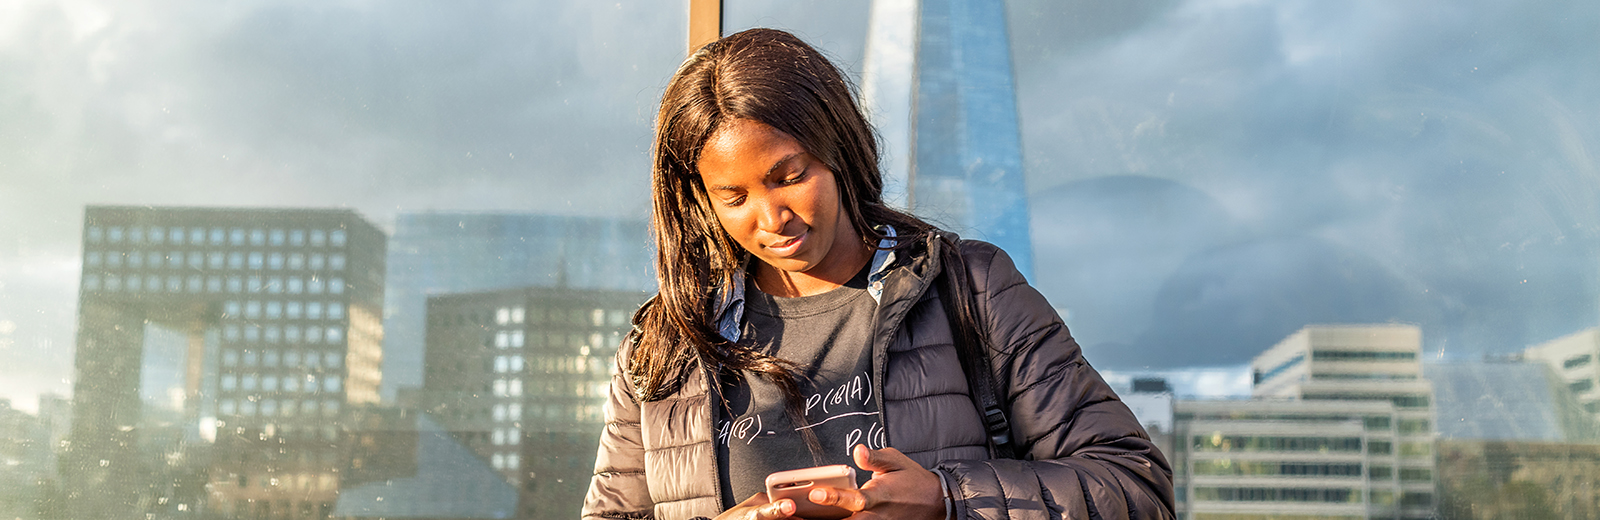 Black female student looking at smartphone, London skyline reflected in the window behind her.